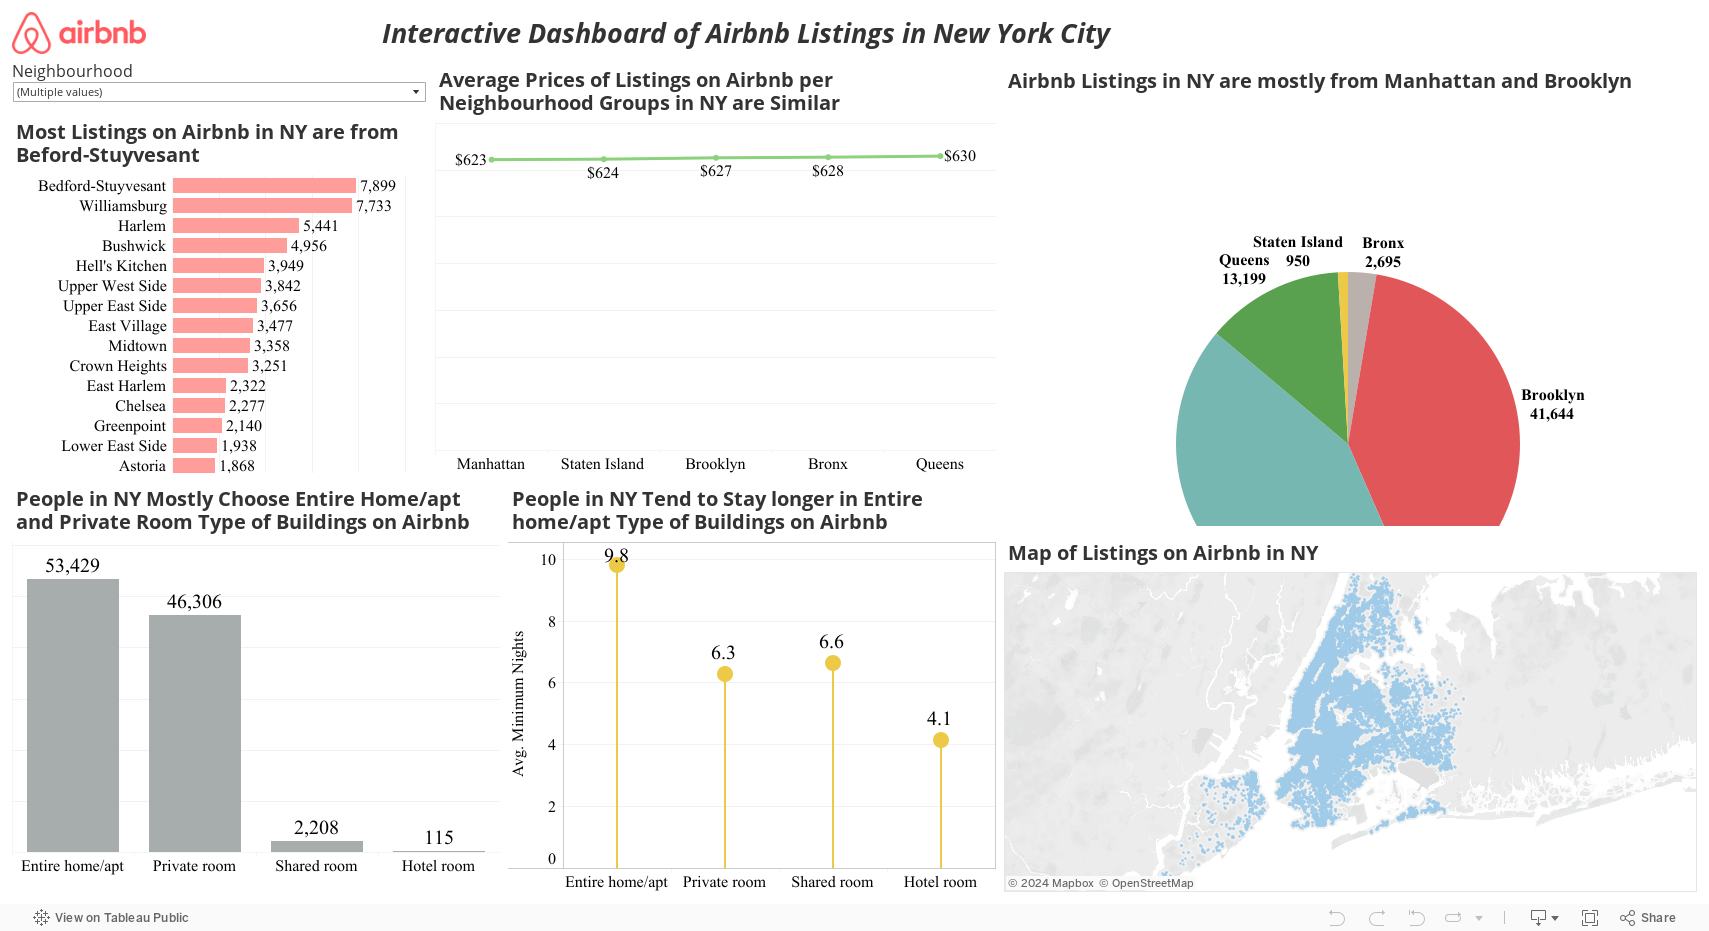 Interactive Dashboard of Airbnb Listings in New York City 